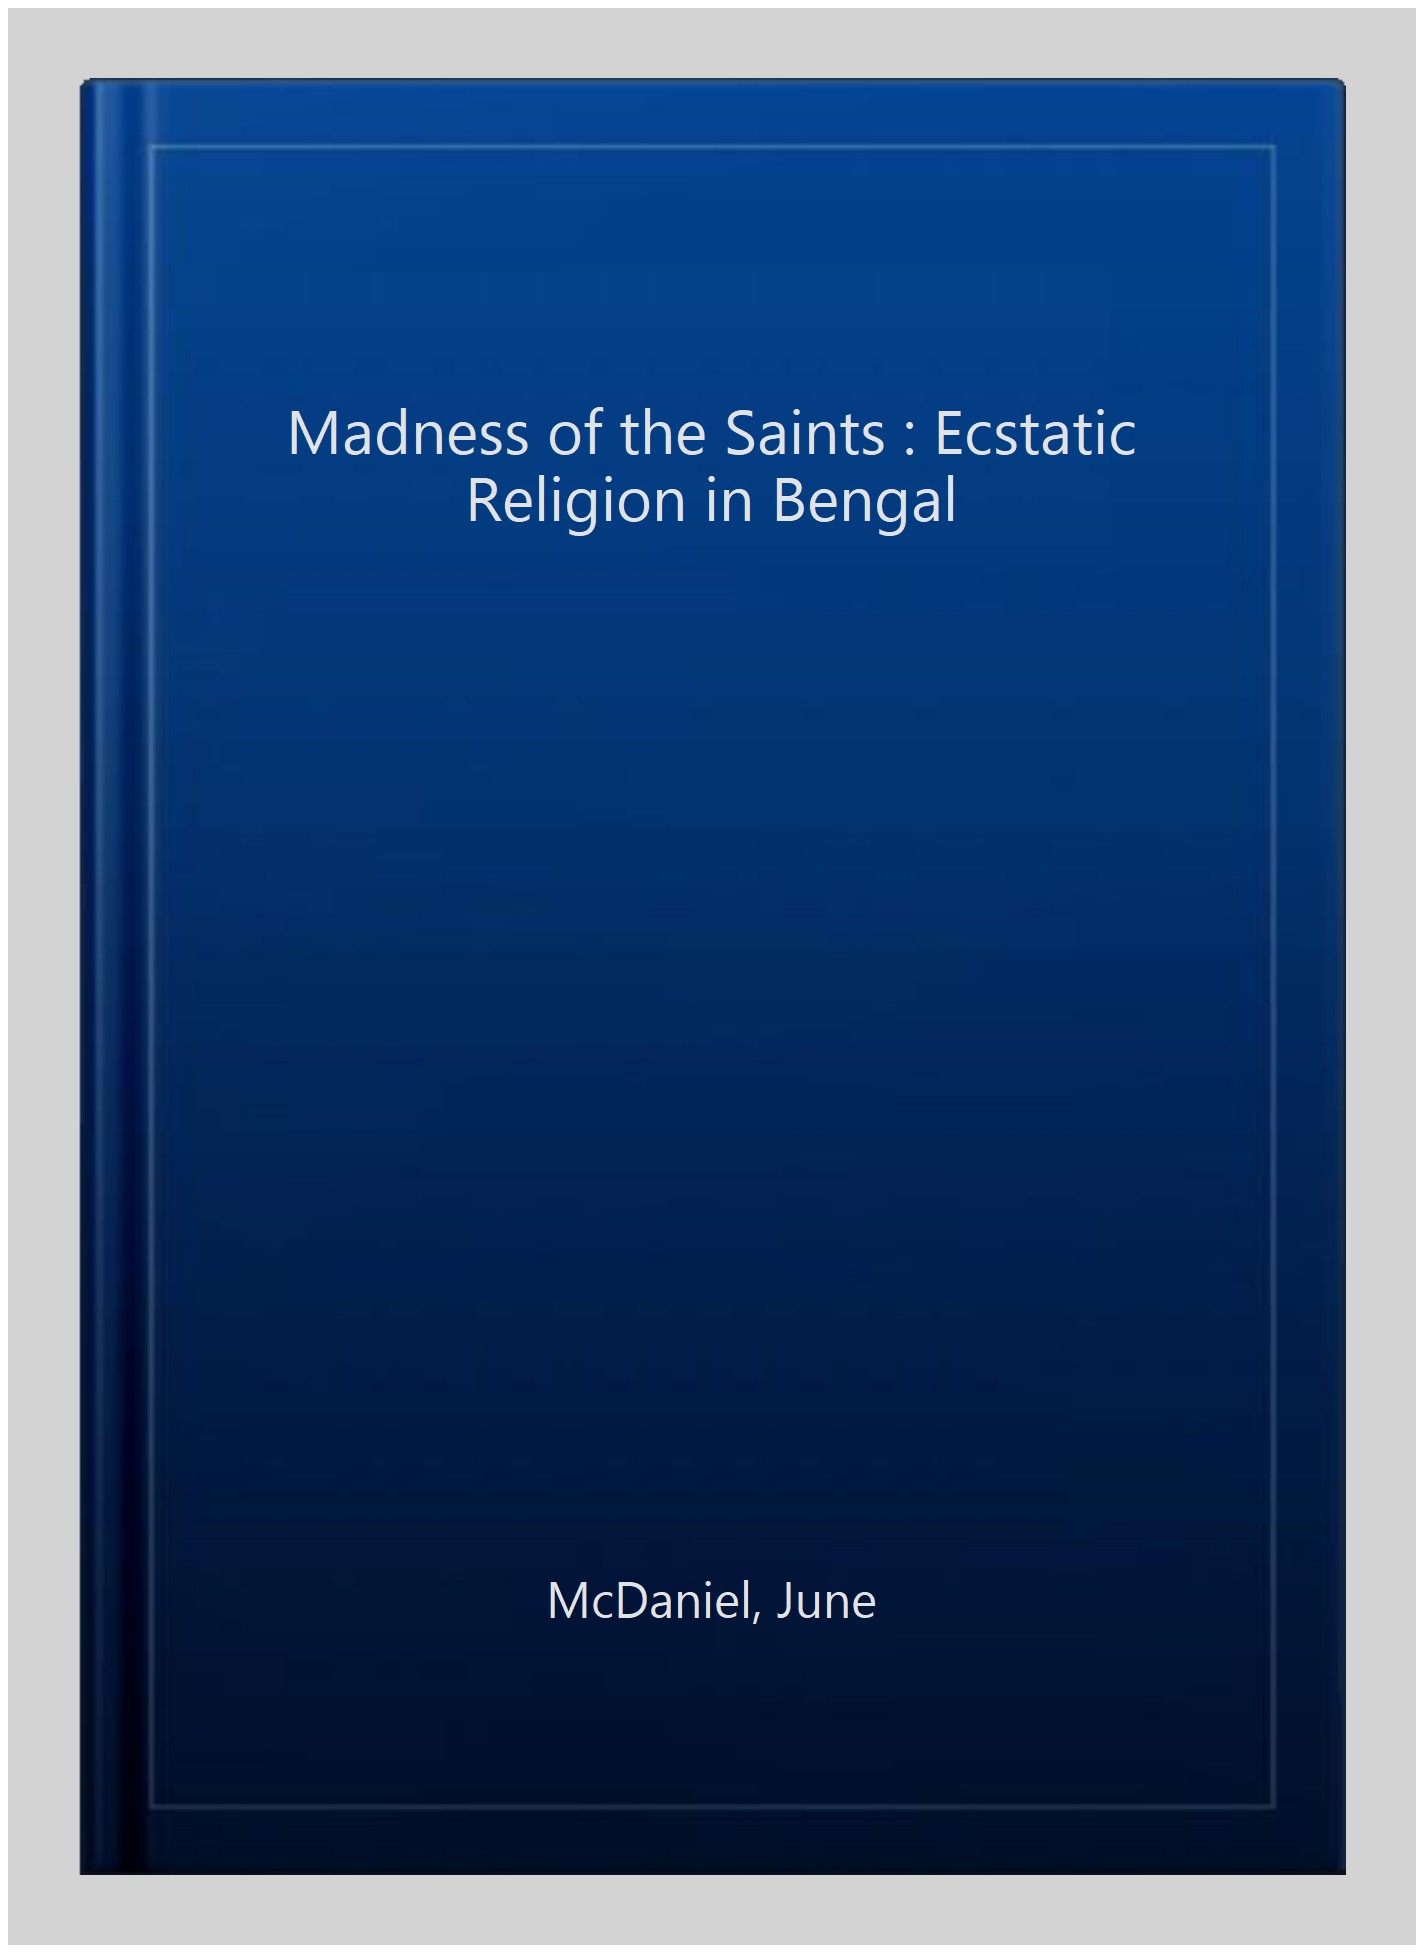 Madness of the Saints : Ecstatic Religion in Bengal - McDaniel, June